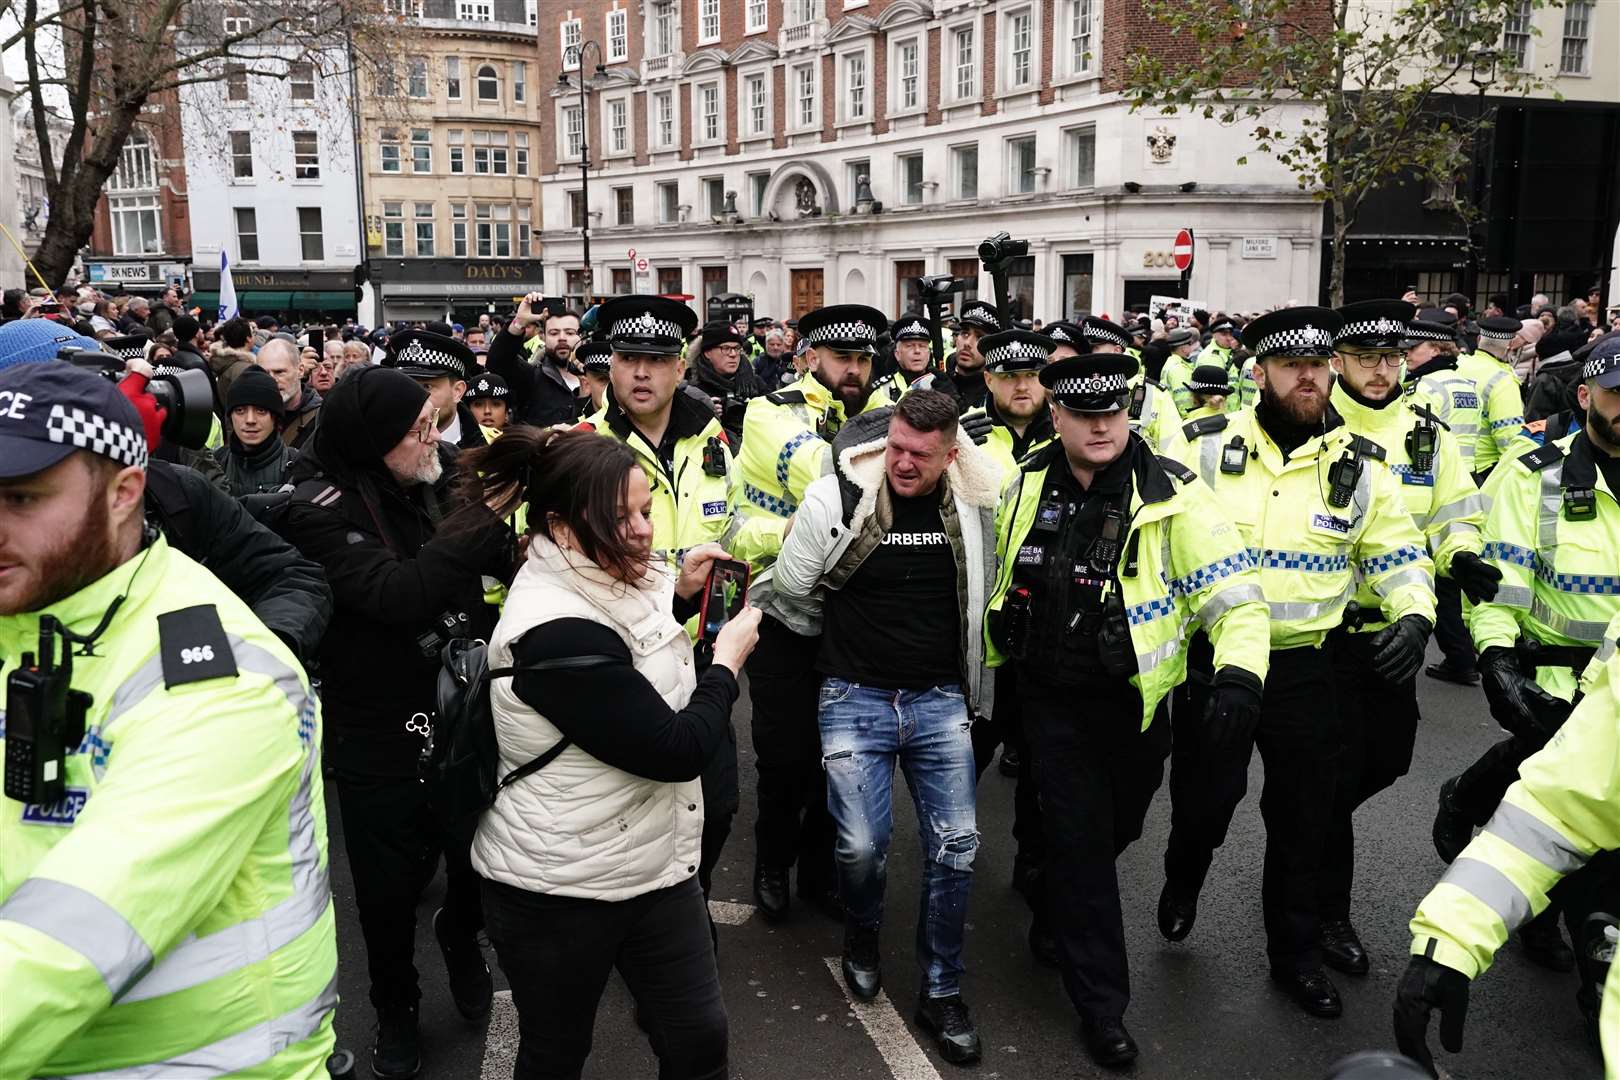 Former leader of the English Defence League Tommy Robinson was led away by police (Jordan Pettitt/PA)